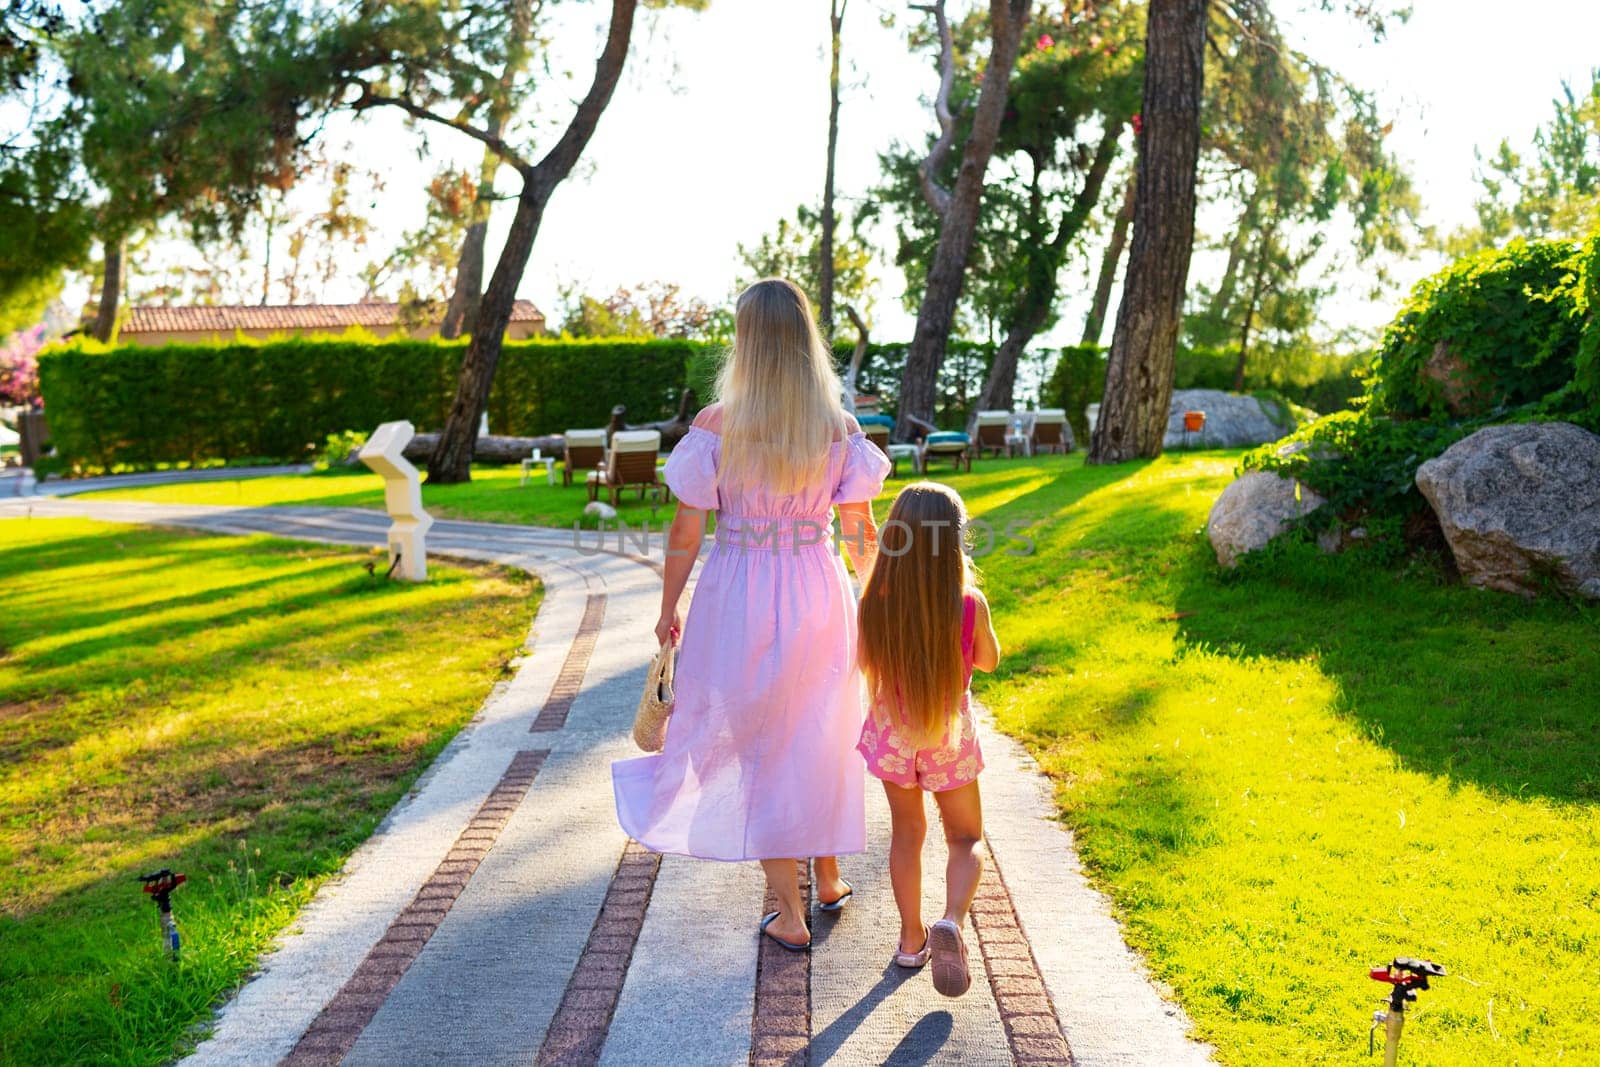 Mother and daughter enjoying walk outdoors in summer, back view